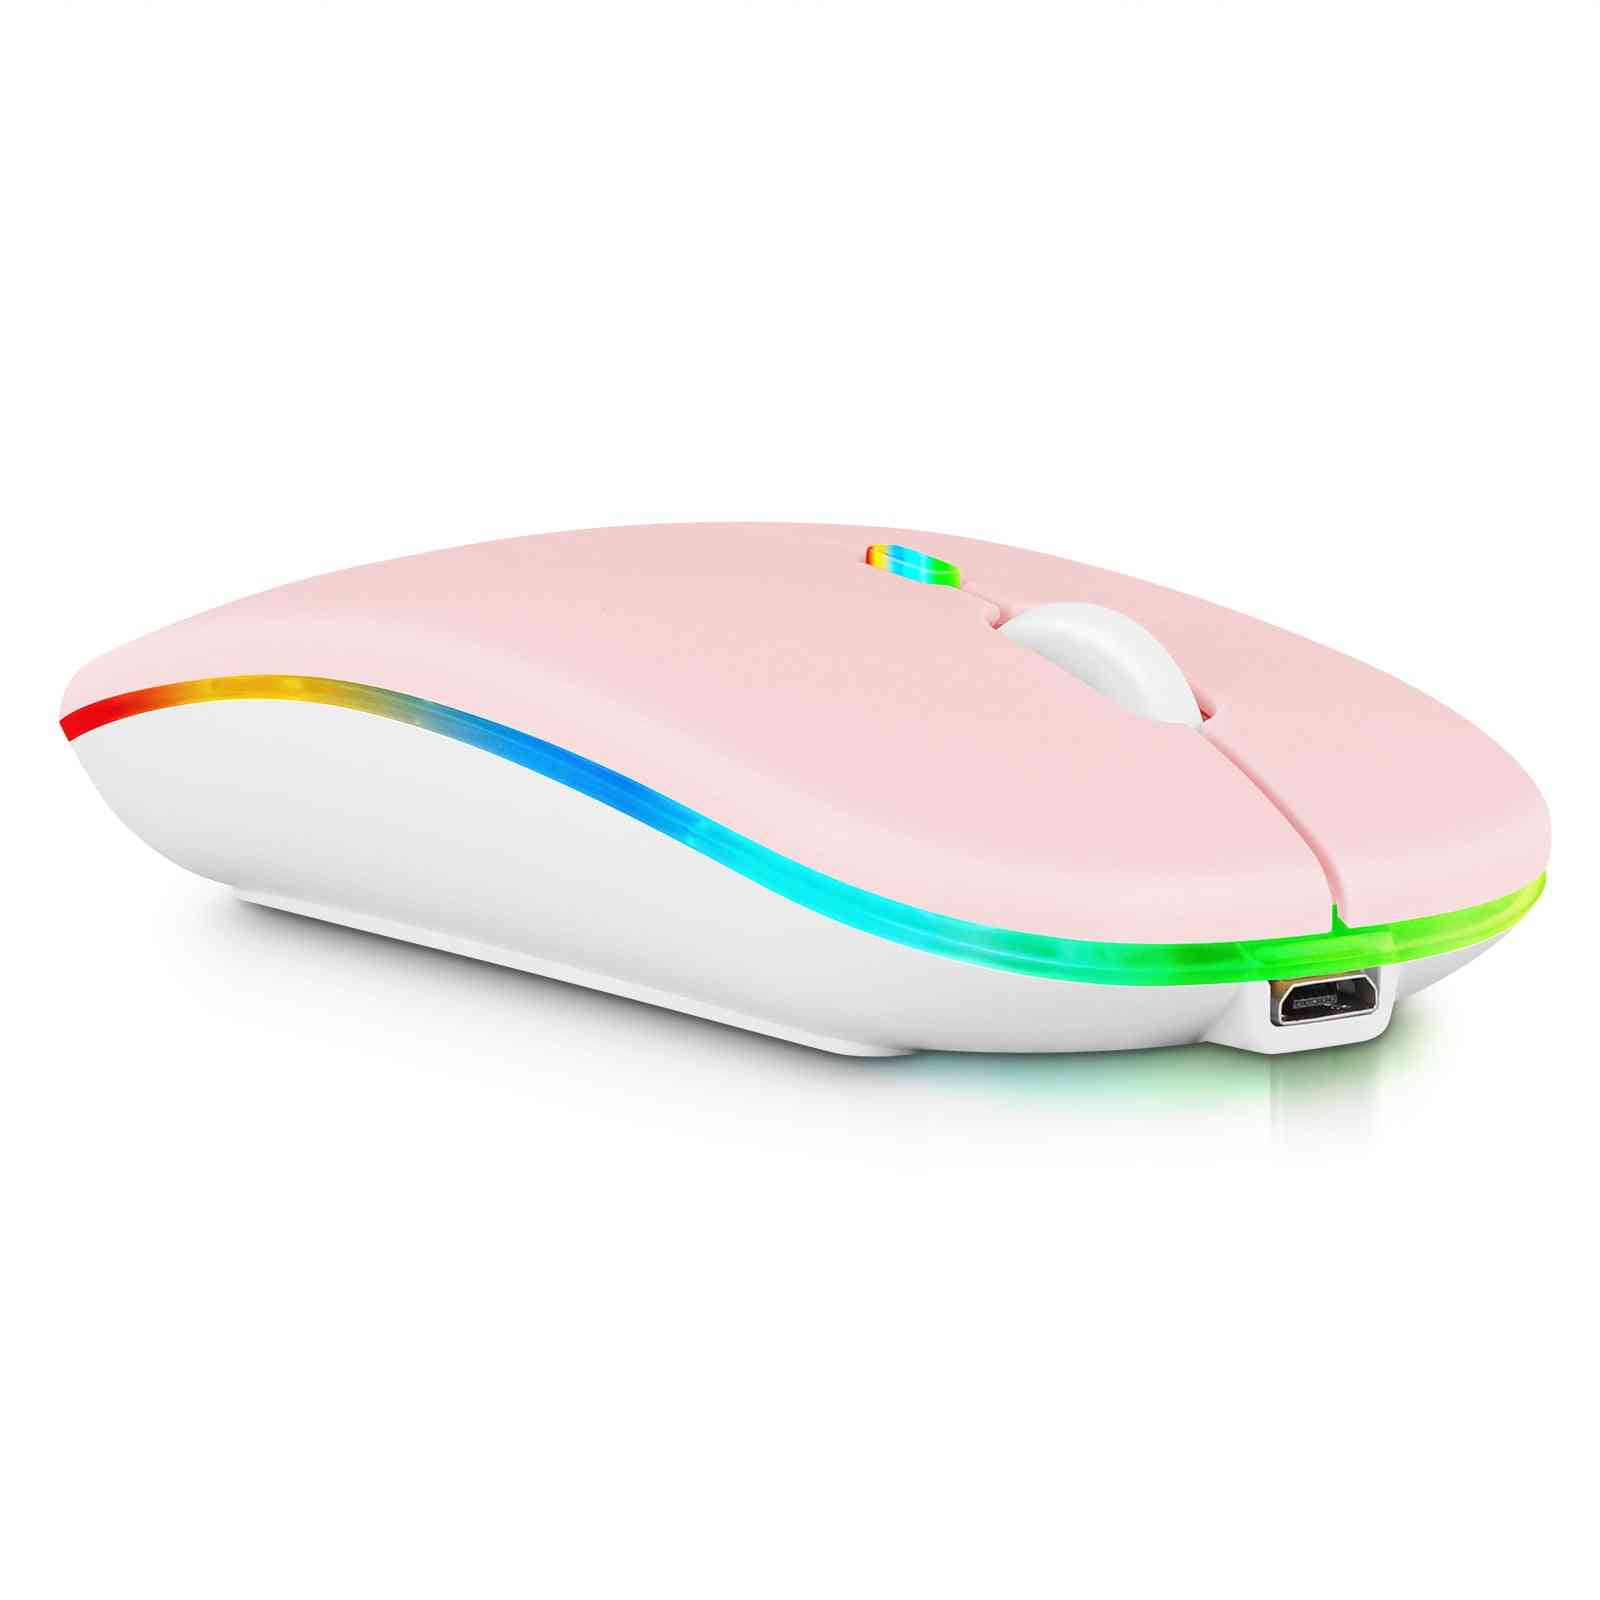 Articulatie rook gesponsord 2.4GHz & Bluetooth Mouse, Rechargeable Wireless LED Mouse for Huawei nova  10z ALso Compatible with TV / Laptop / PC / Mac / iPad pro / Computer /  Tablet / Android - Banana Yellow - Walmart.com